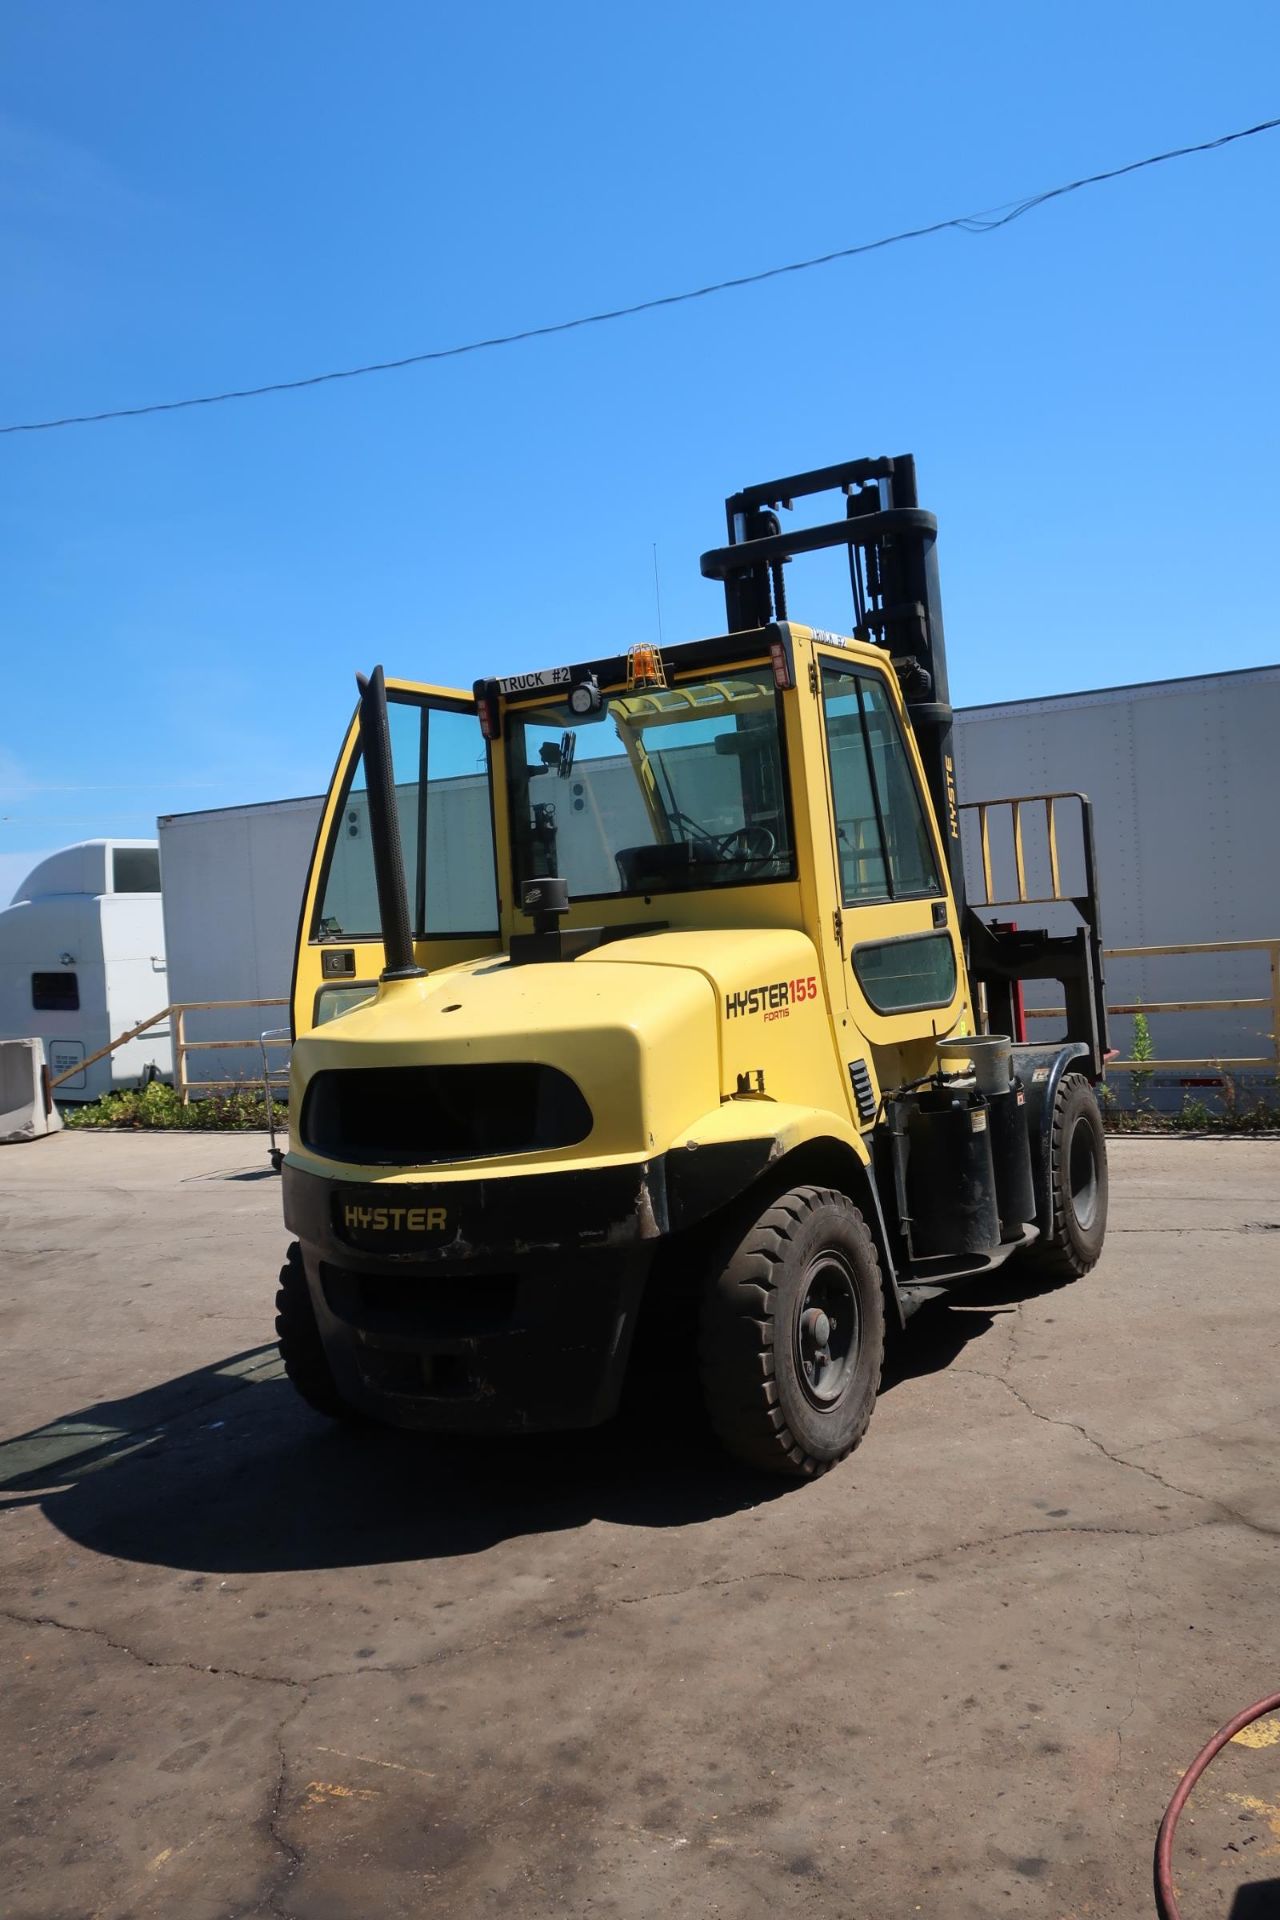 FREE CUSTOMS - MINT 2015 Hyster OUTDOOR 15500lbs Capacity Forklift with 72" - LPG (propane) with - Image 2 of 5